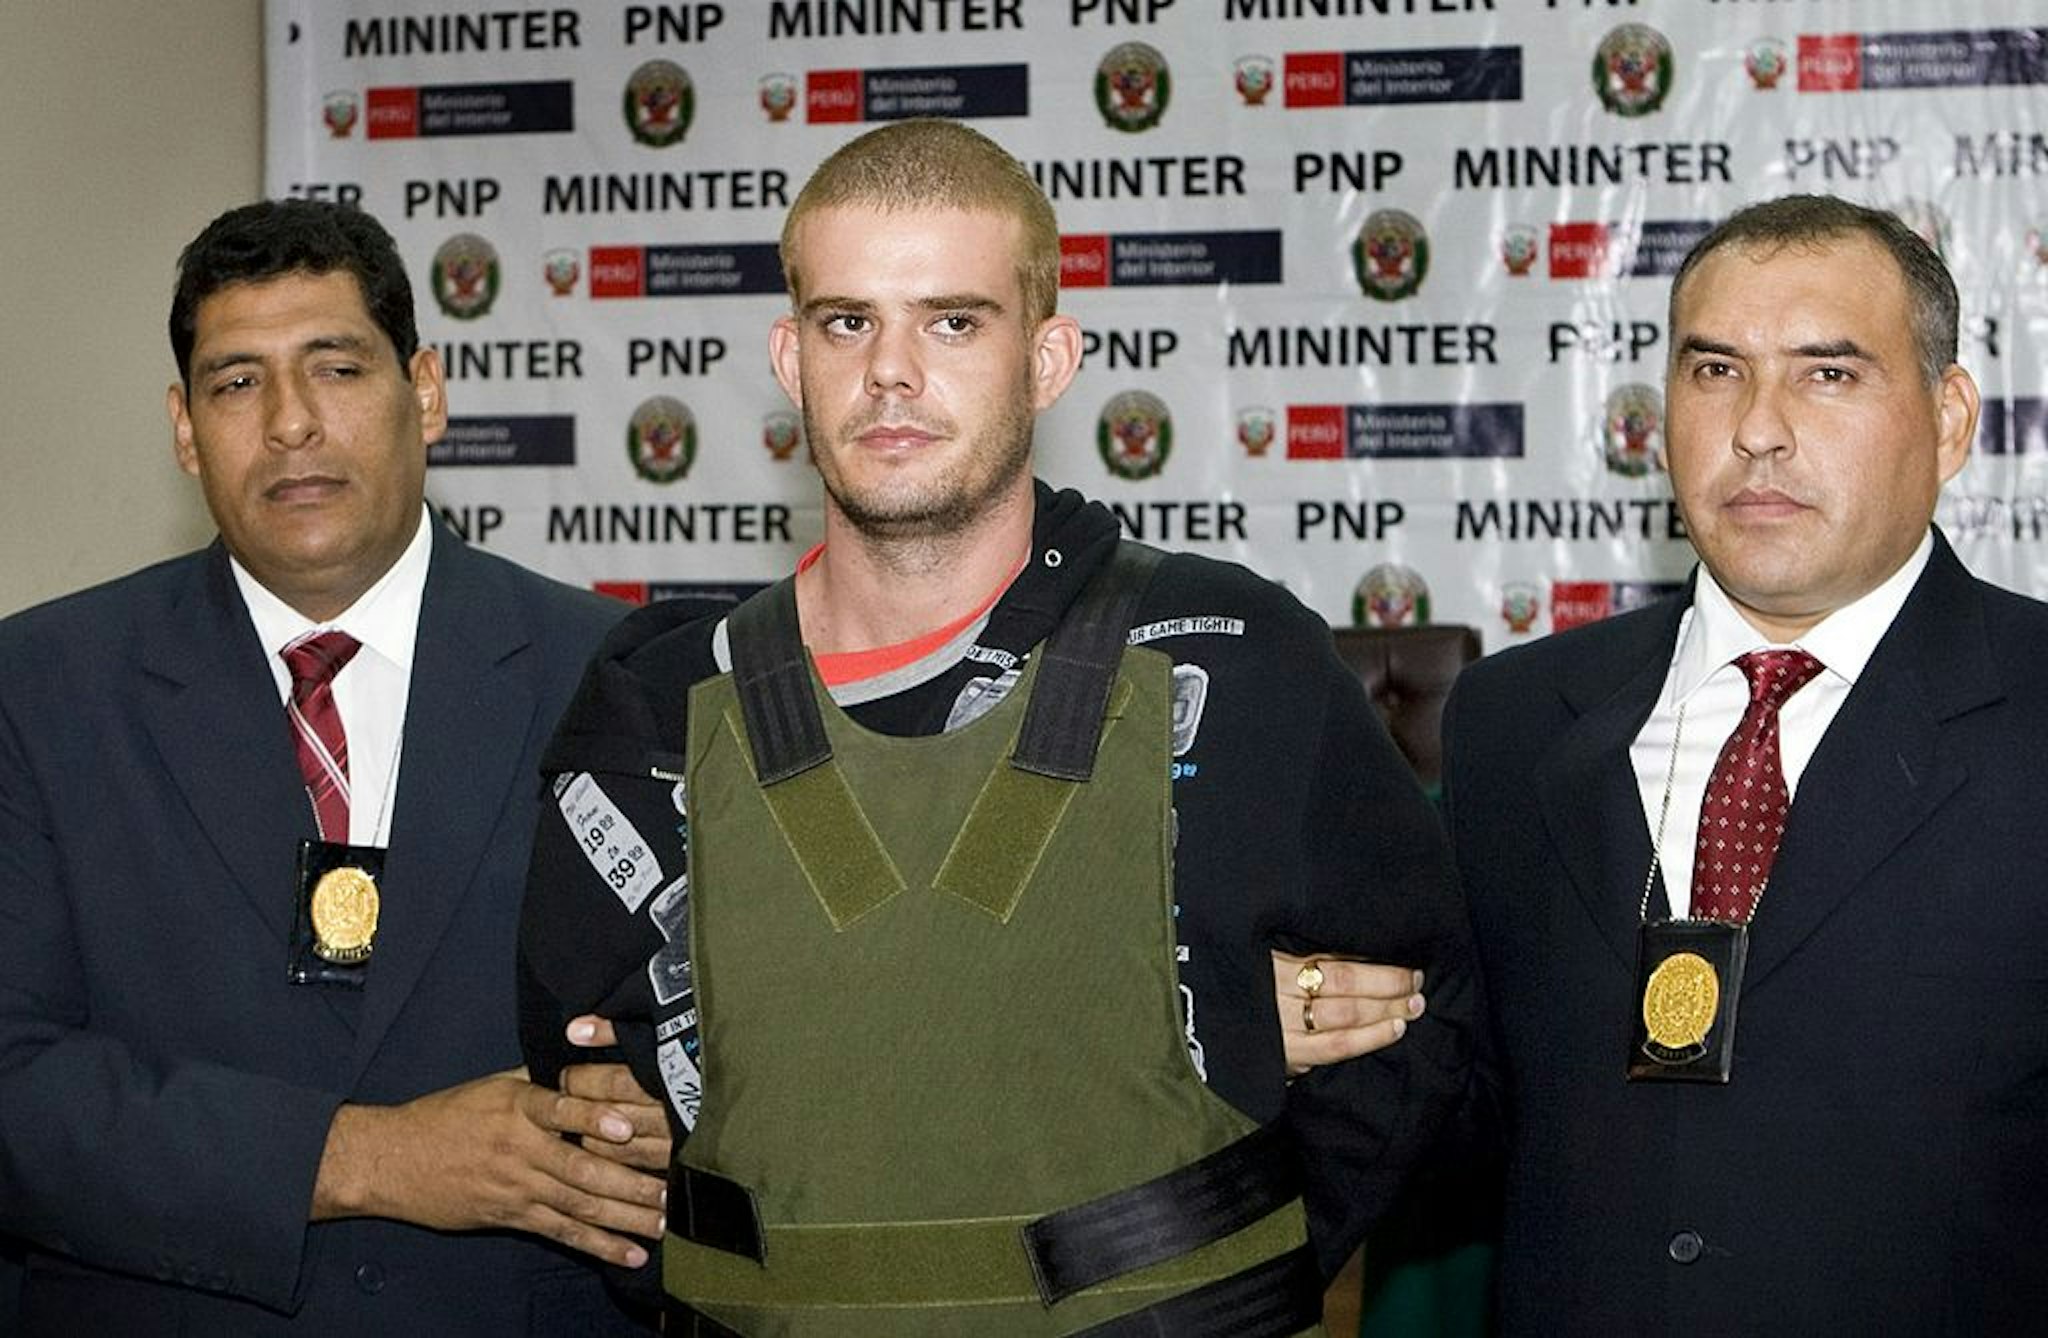 Joran Andreas Petrus van der Sloot (C), is escorted by Peruvian police as he arrives at the DIRINCRI (Criminal Investigation Direction) office in Lima on June 5, 2010.